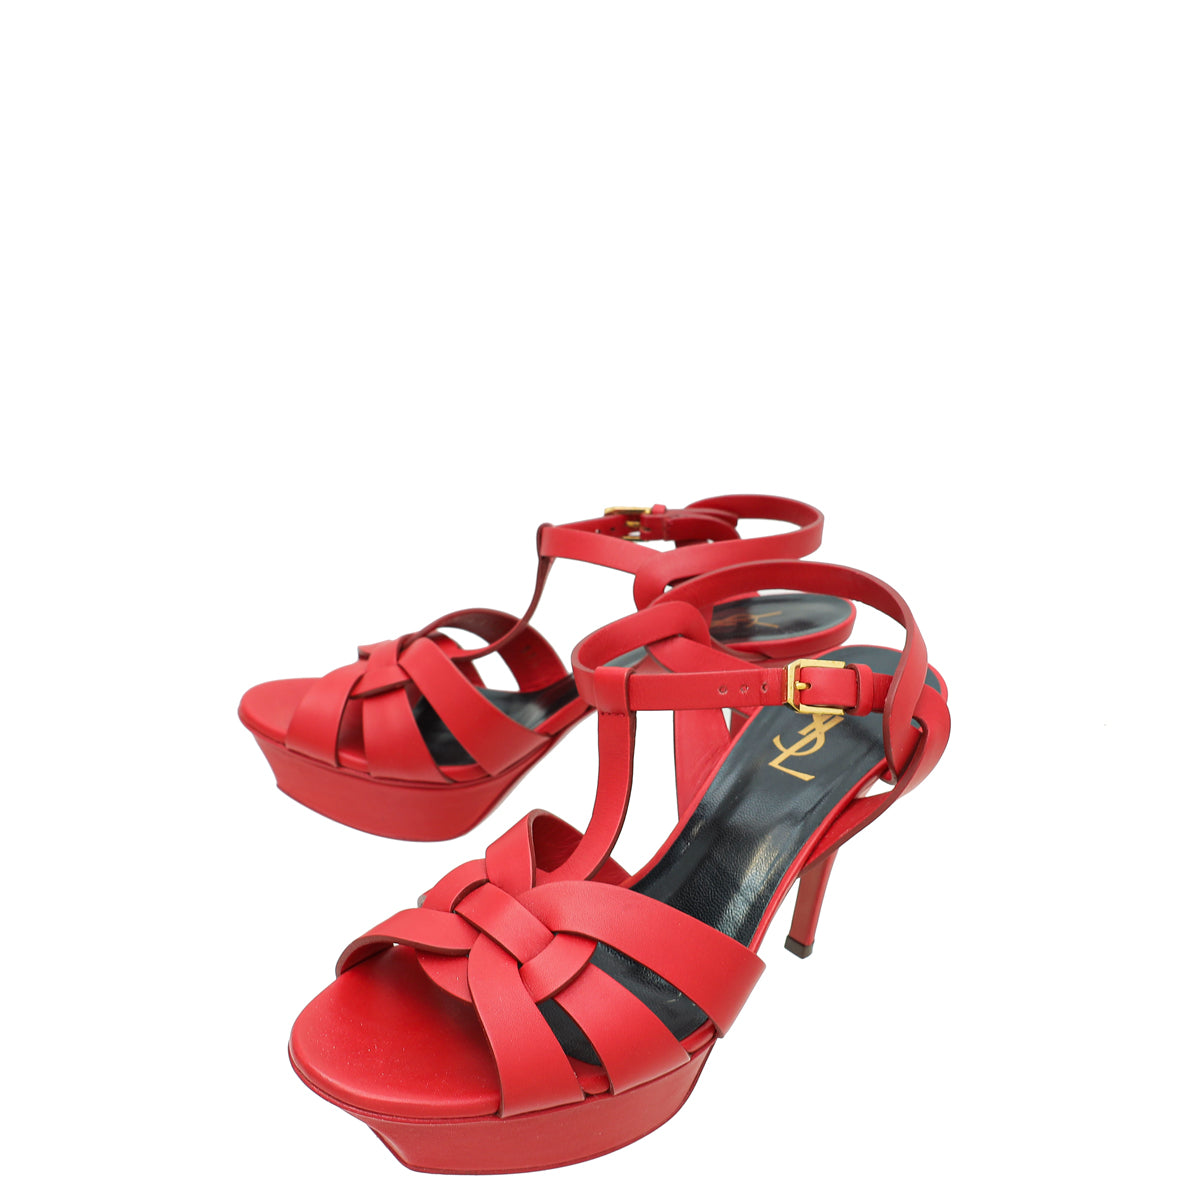 YSL Red Tribute Leather Sandal 37.5